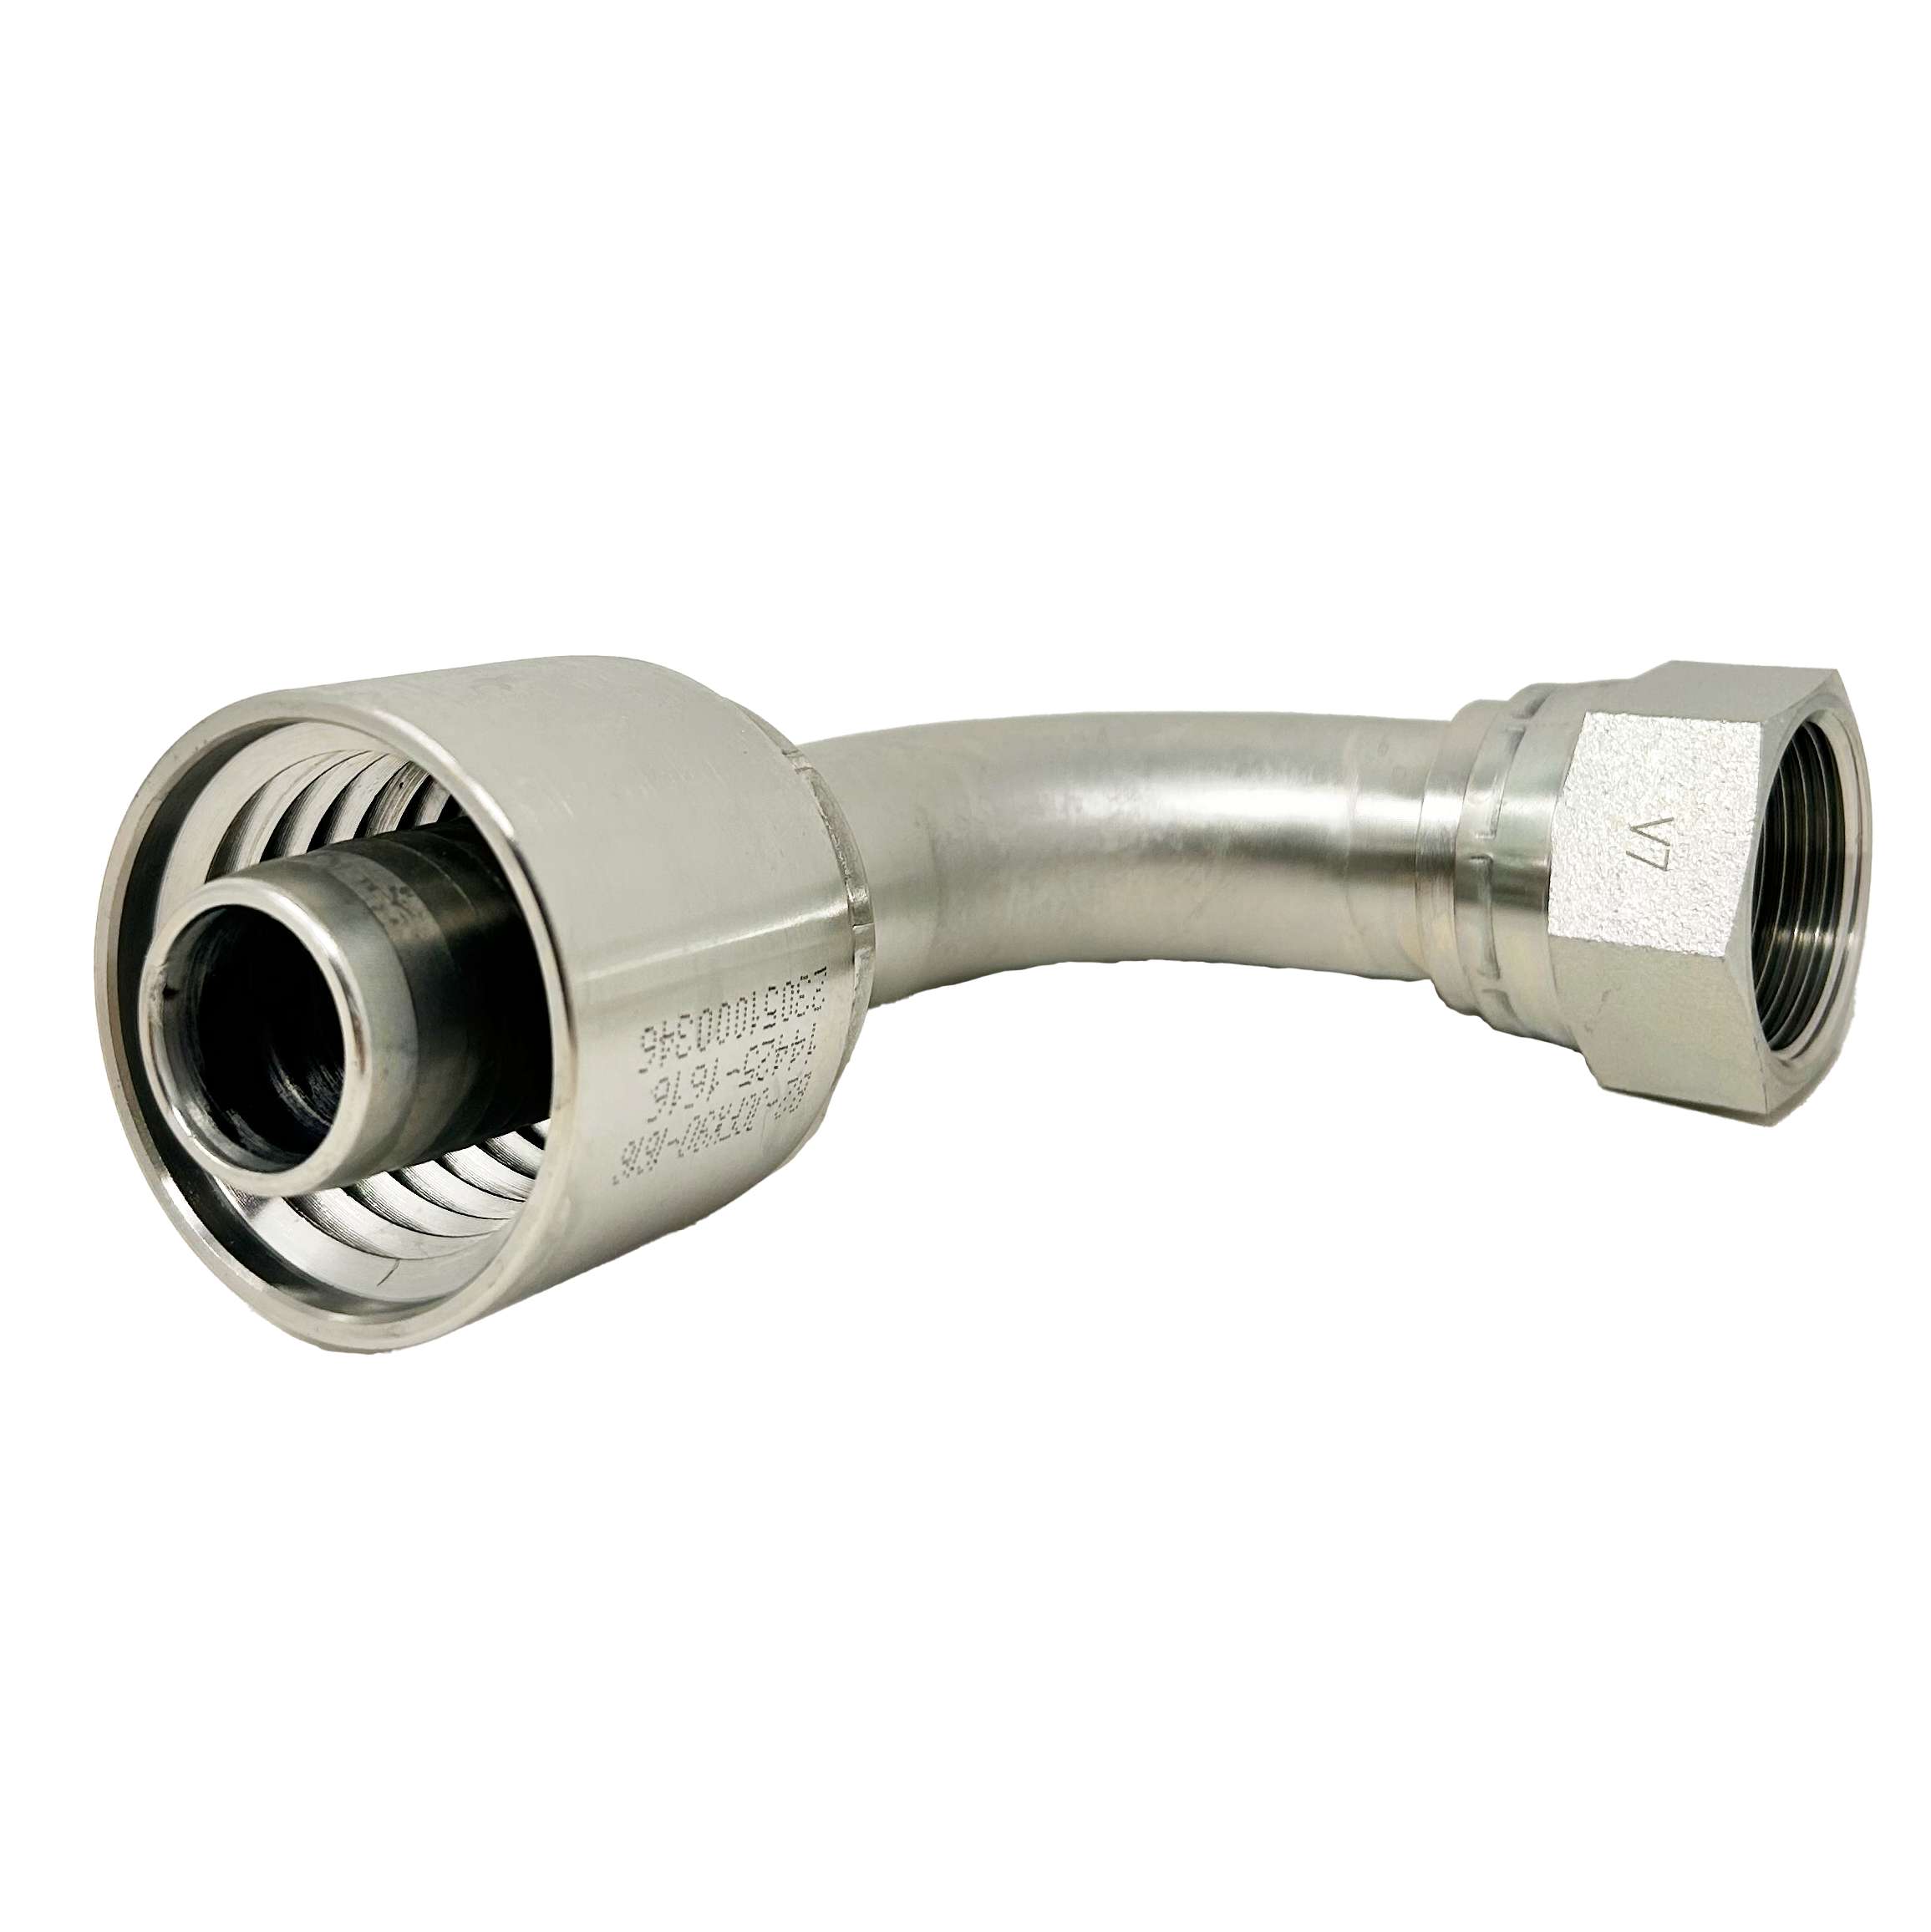 B2-JCFX90-0404S: Continental Hose Fitting, 0.25 (1/4") Hose ID x 7/16-20 Female JIC, 90-Degree Swivel Connection